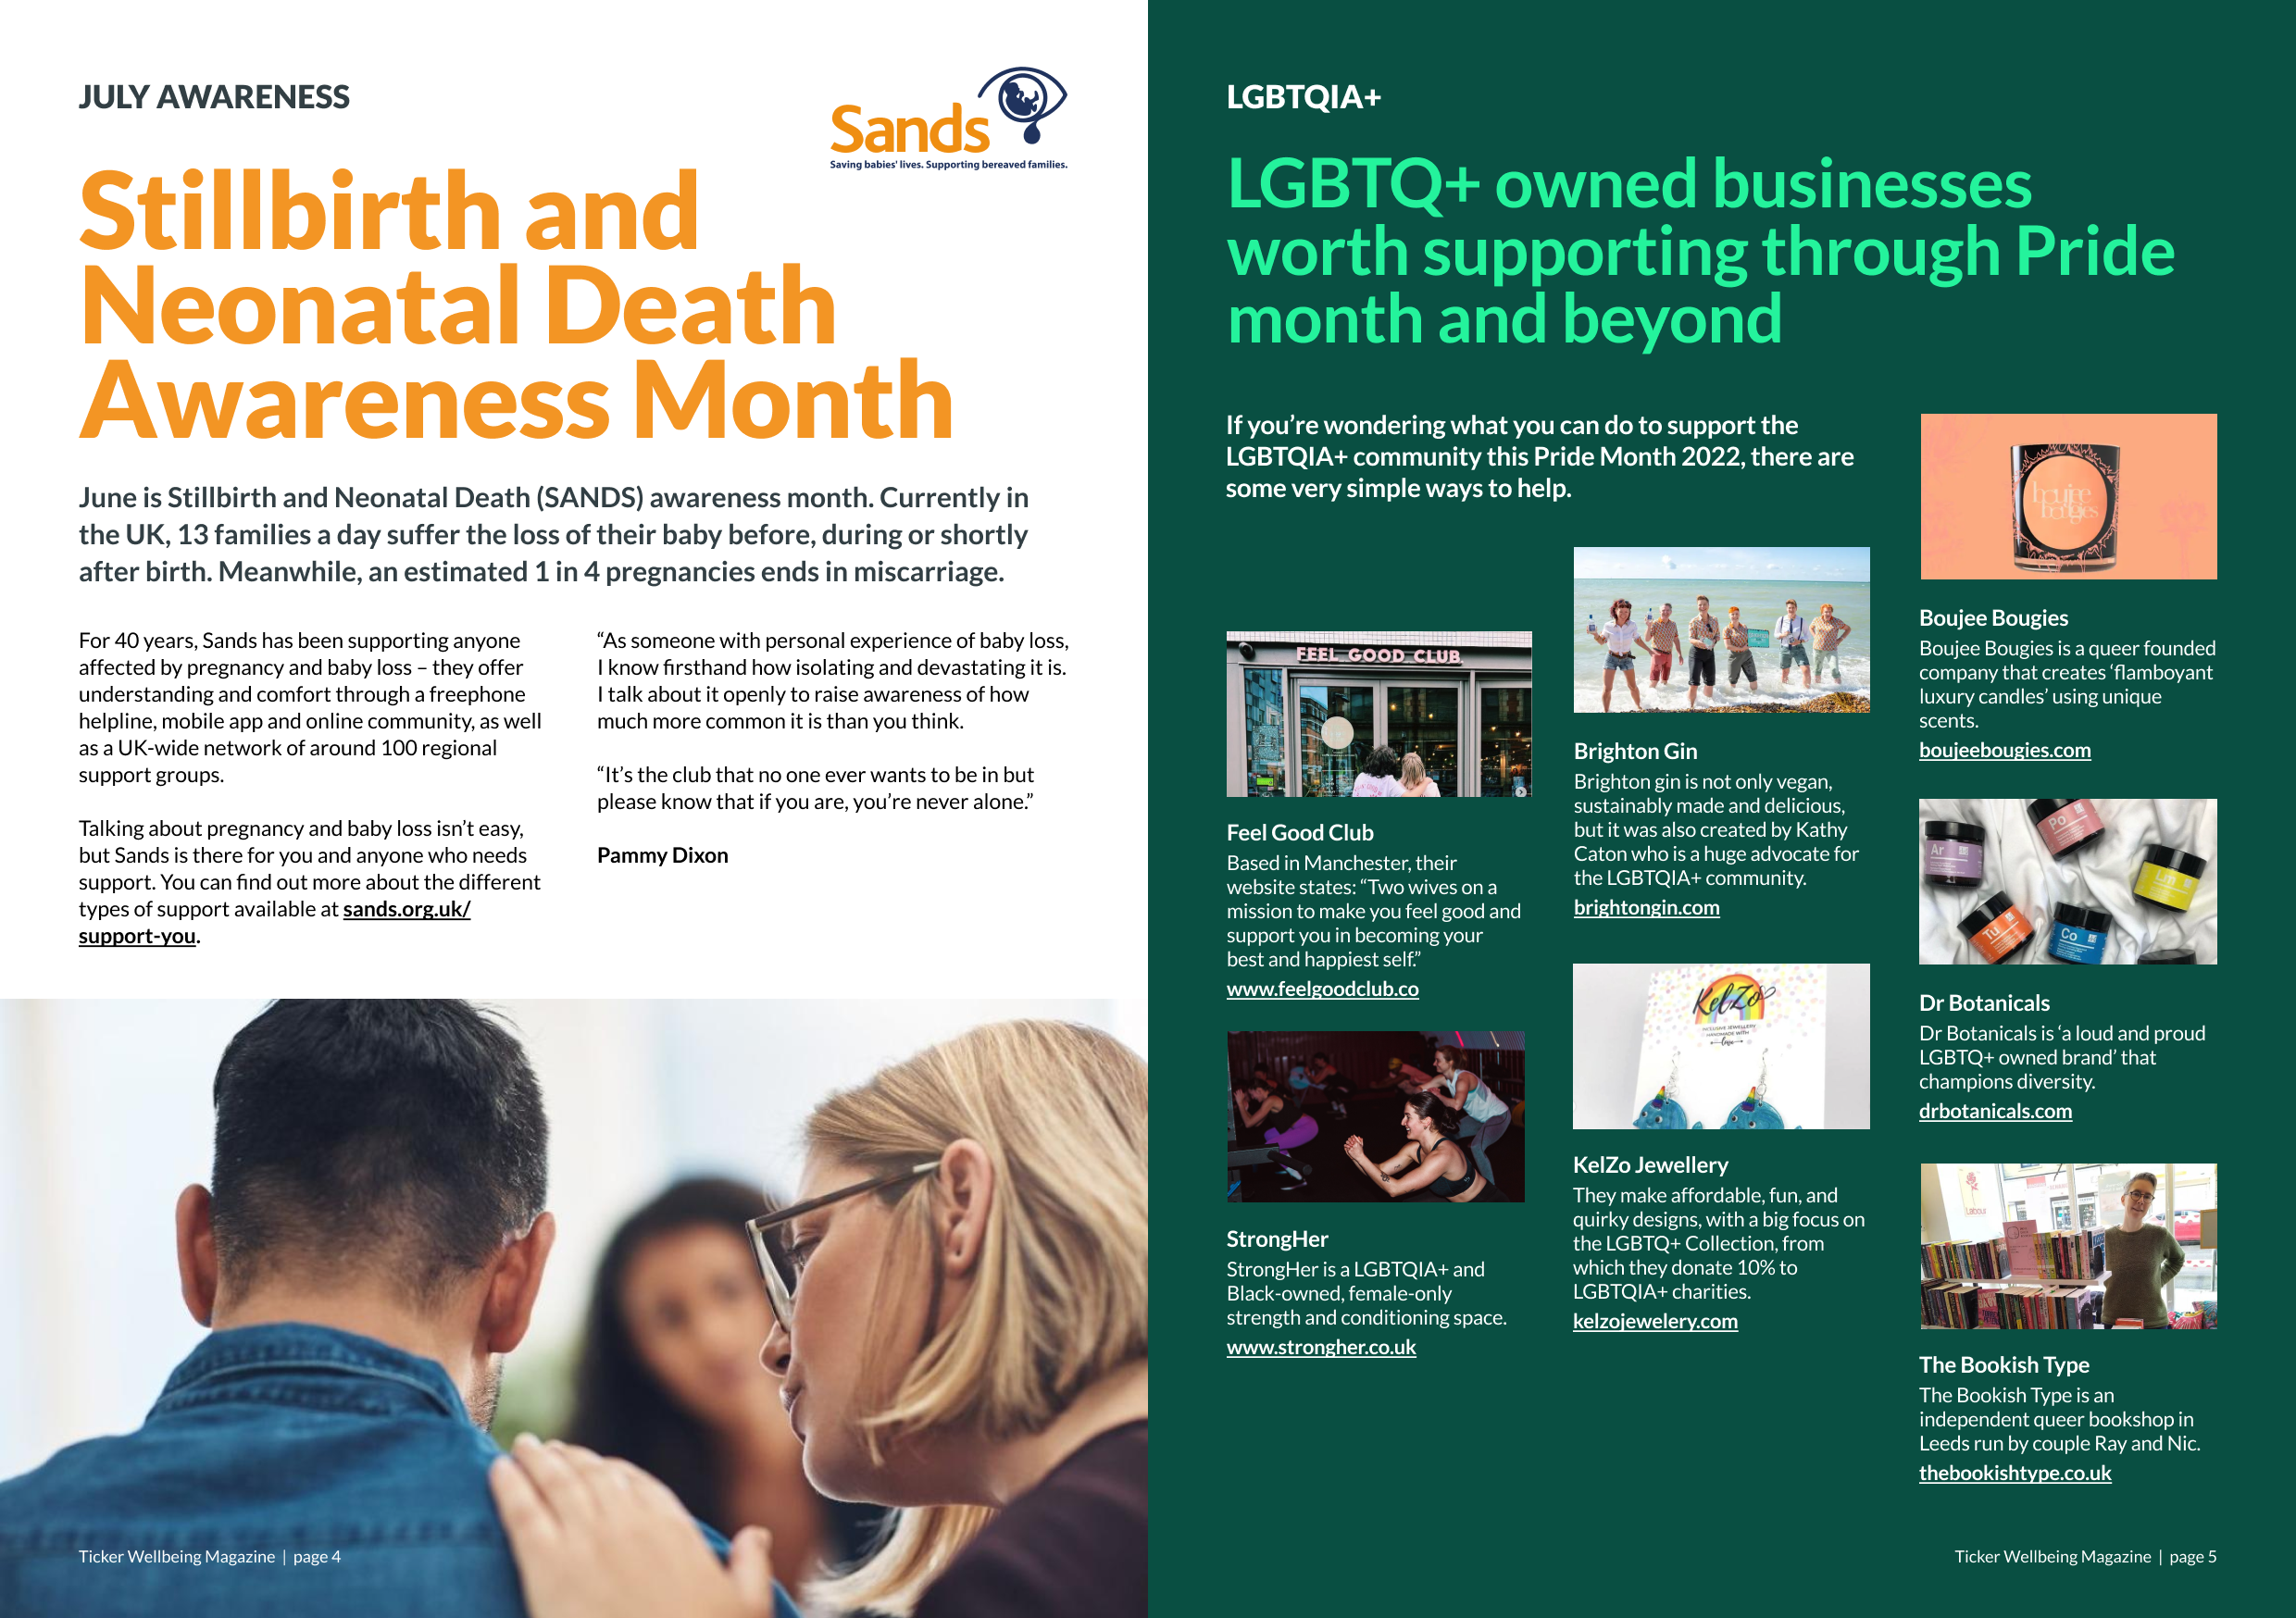 Two-page magazine spread. On the left-hand side is a the SANDS charity logo and text about Stillbirth Awareness month. On the right-hand side is a directory of LGBTQ+ businesses. 